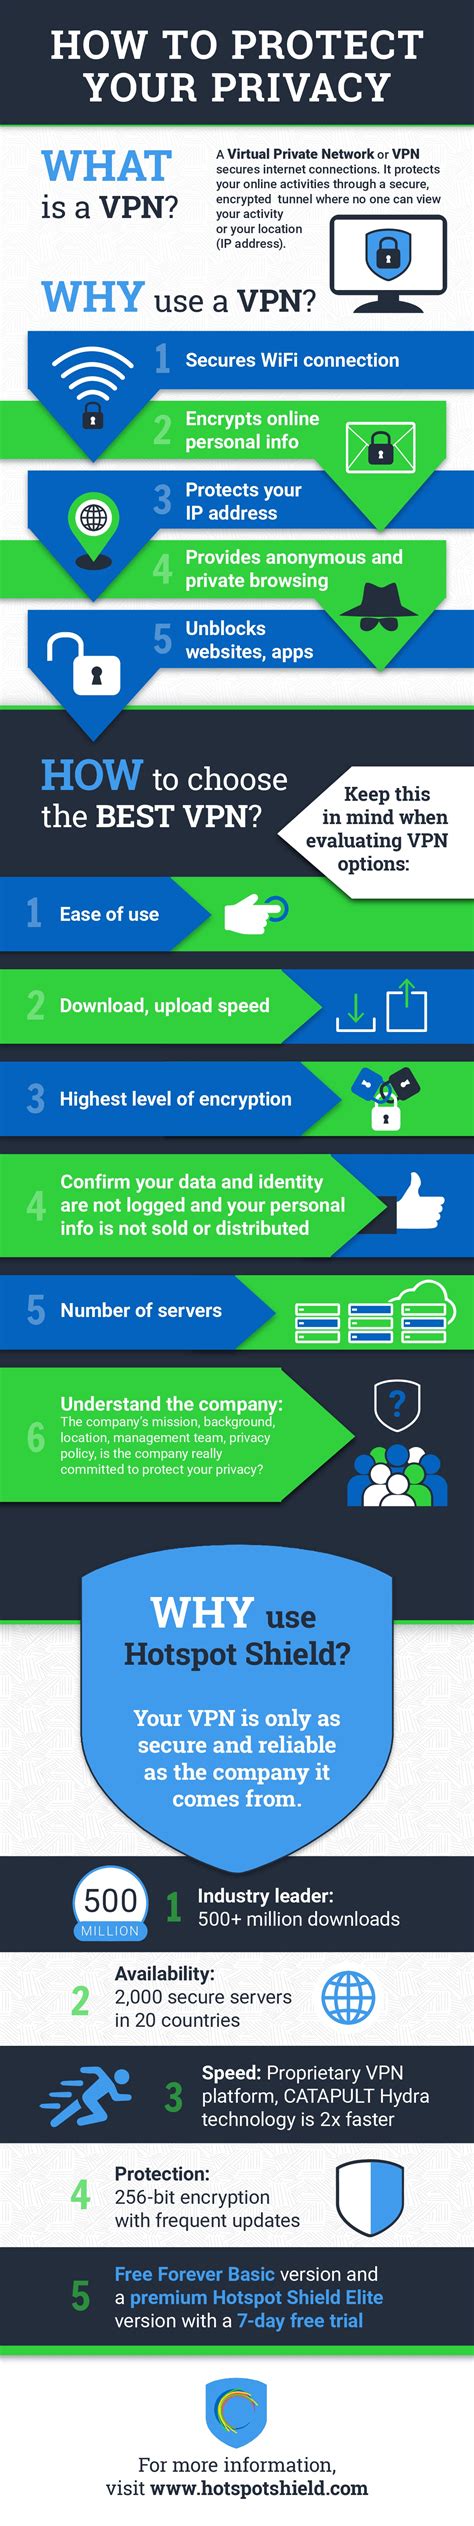 How To Protect Your Privacy Infographic